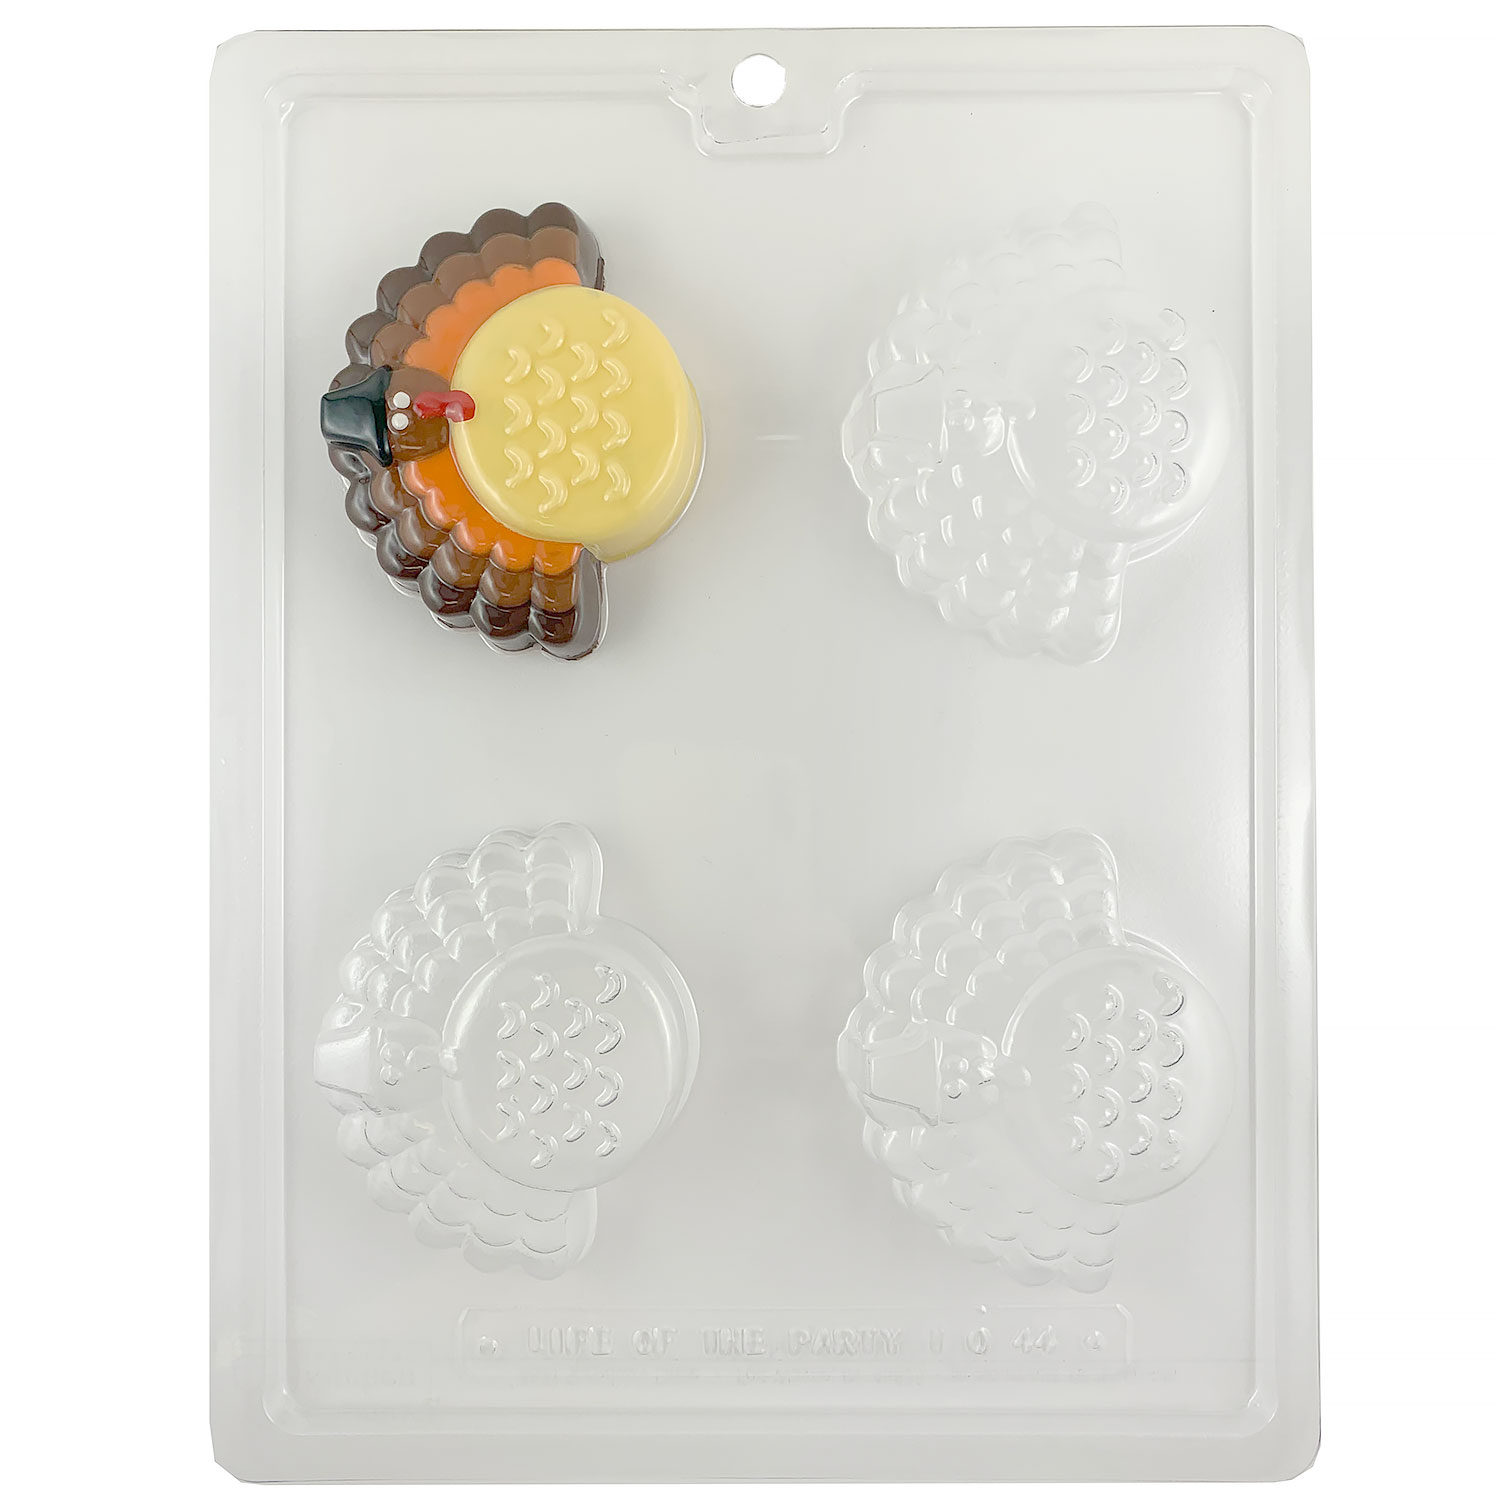 AIKEFOO Original Biscuit Chocolate Candy Mold Oreo Mold